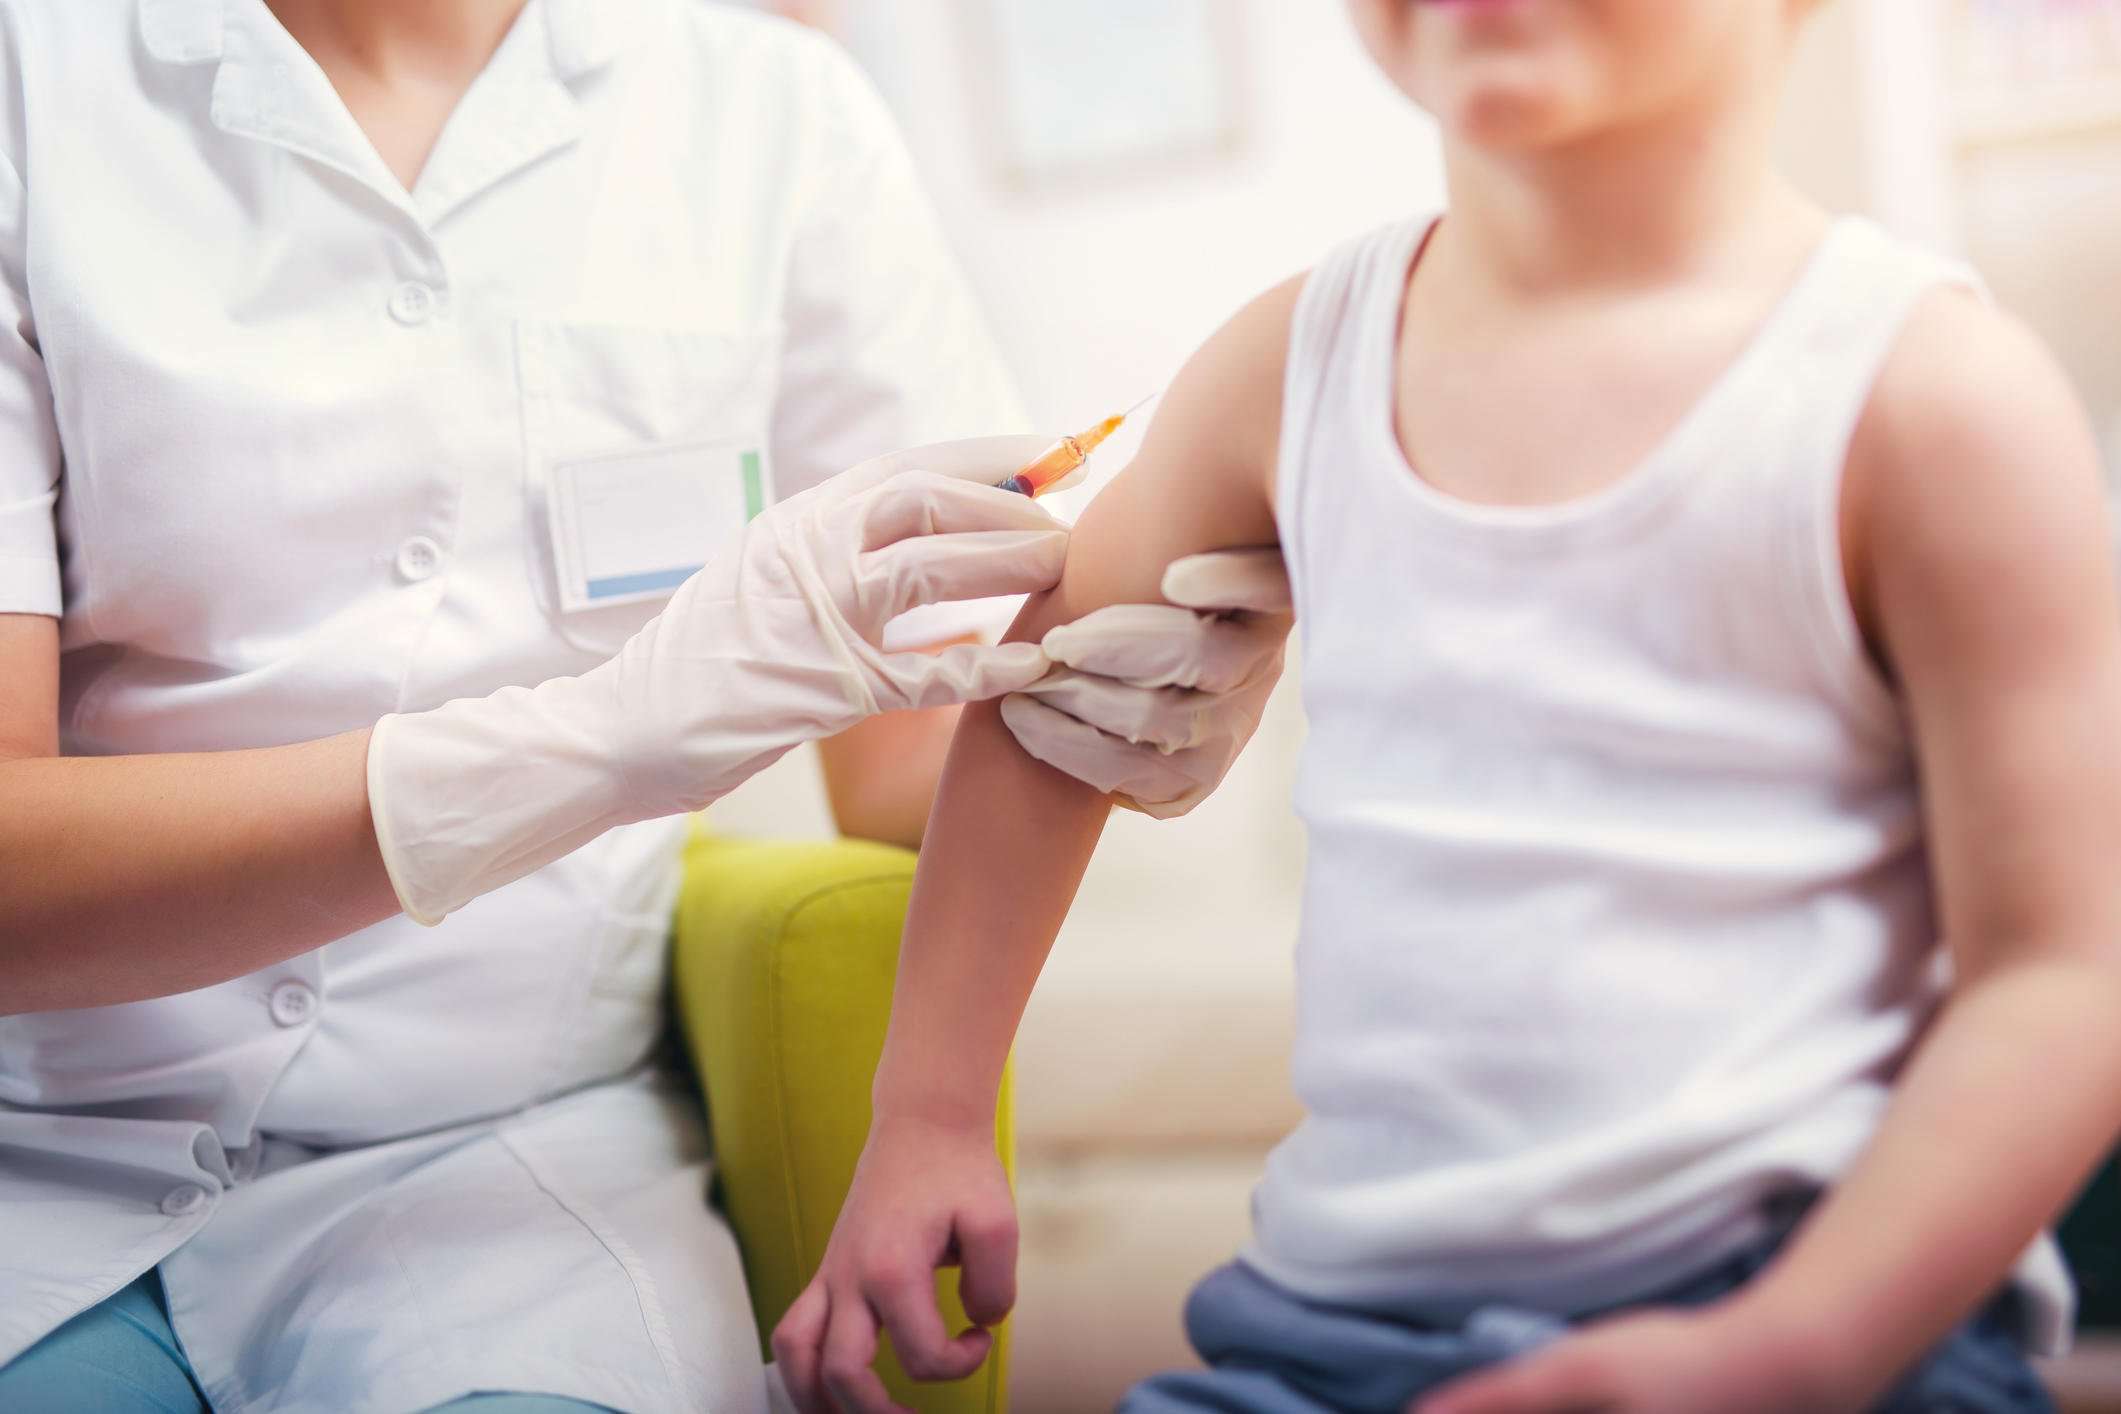 image for Maine confirms its first case of measles in 20 years